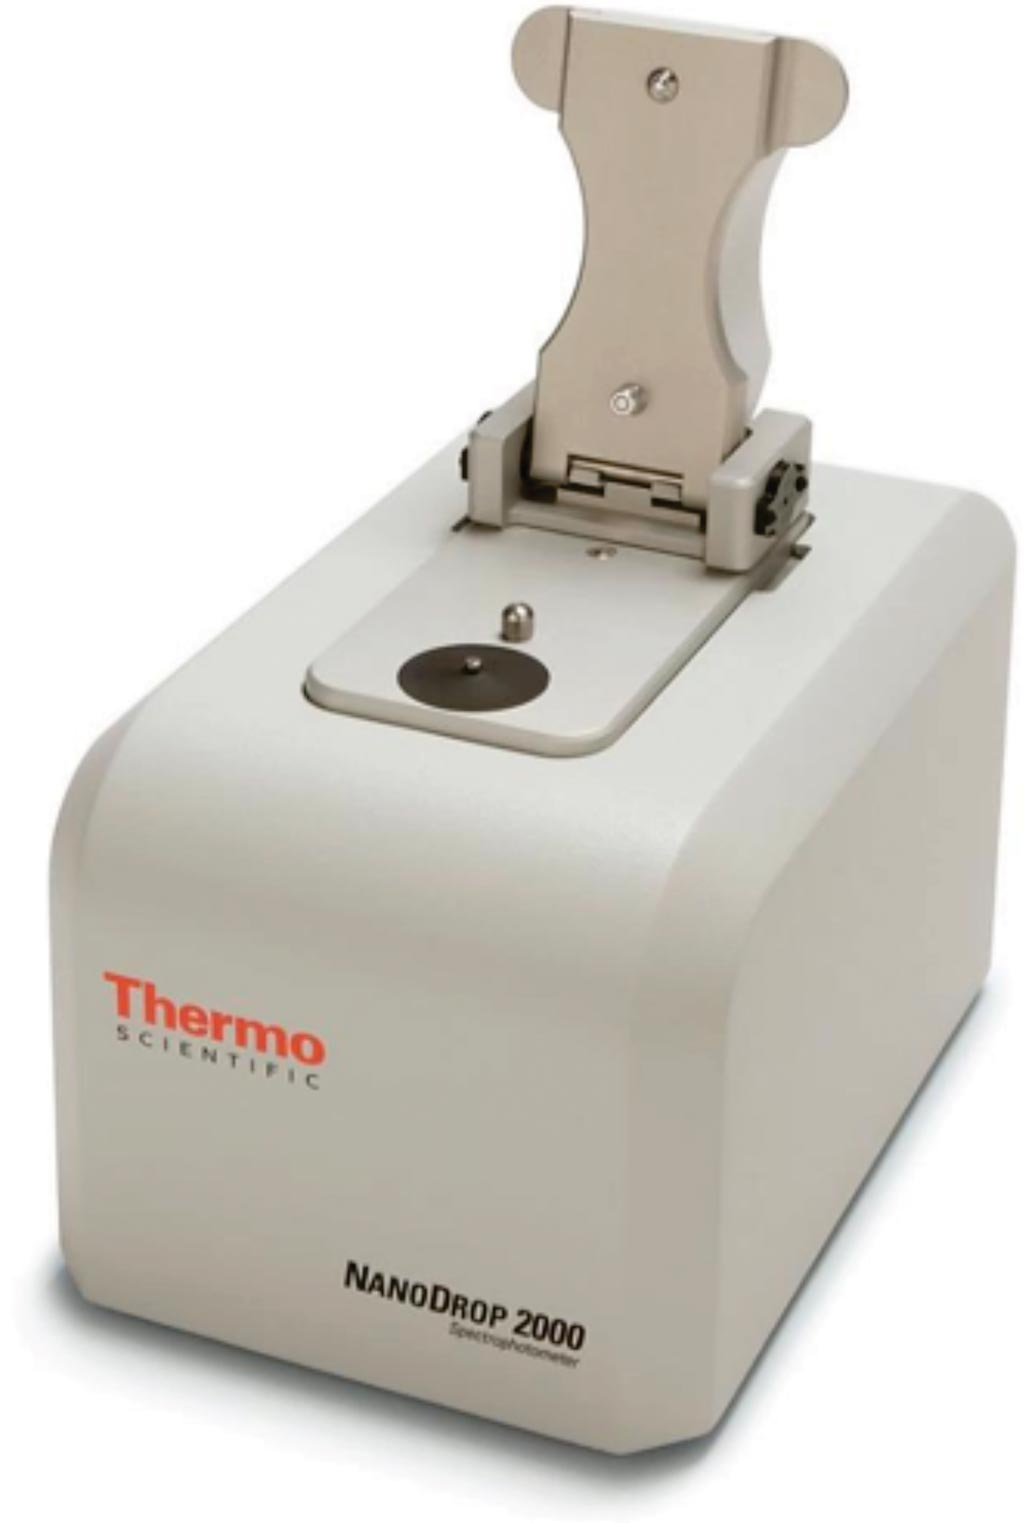 Image: The NanoDrop 2000 Spectrophotometer used to quantify and assess purity of DNA, RNA, and Proteins (Photo courtesy of Thermo Fisher Scientific).